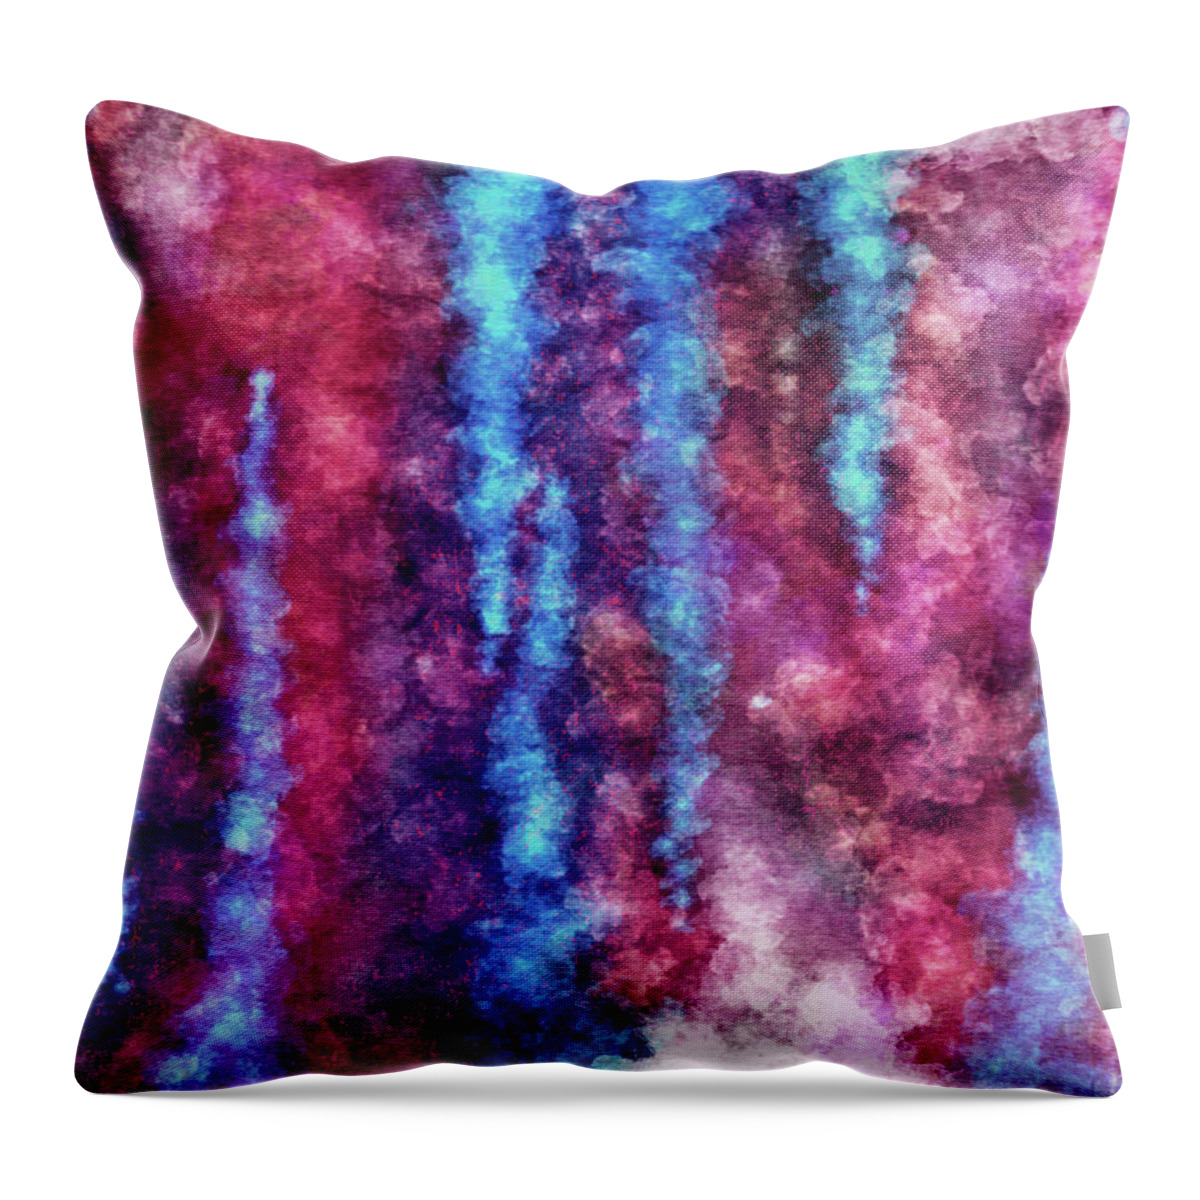 Crystallize Throw Pillow featuring the mixed media Neon Amalgam - Contemporary Abstract - Abstract Expressionist painting - Blue, Purple, Violet by Studio Grafiikka